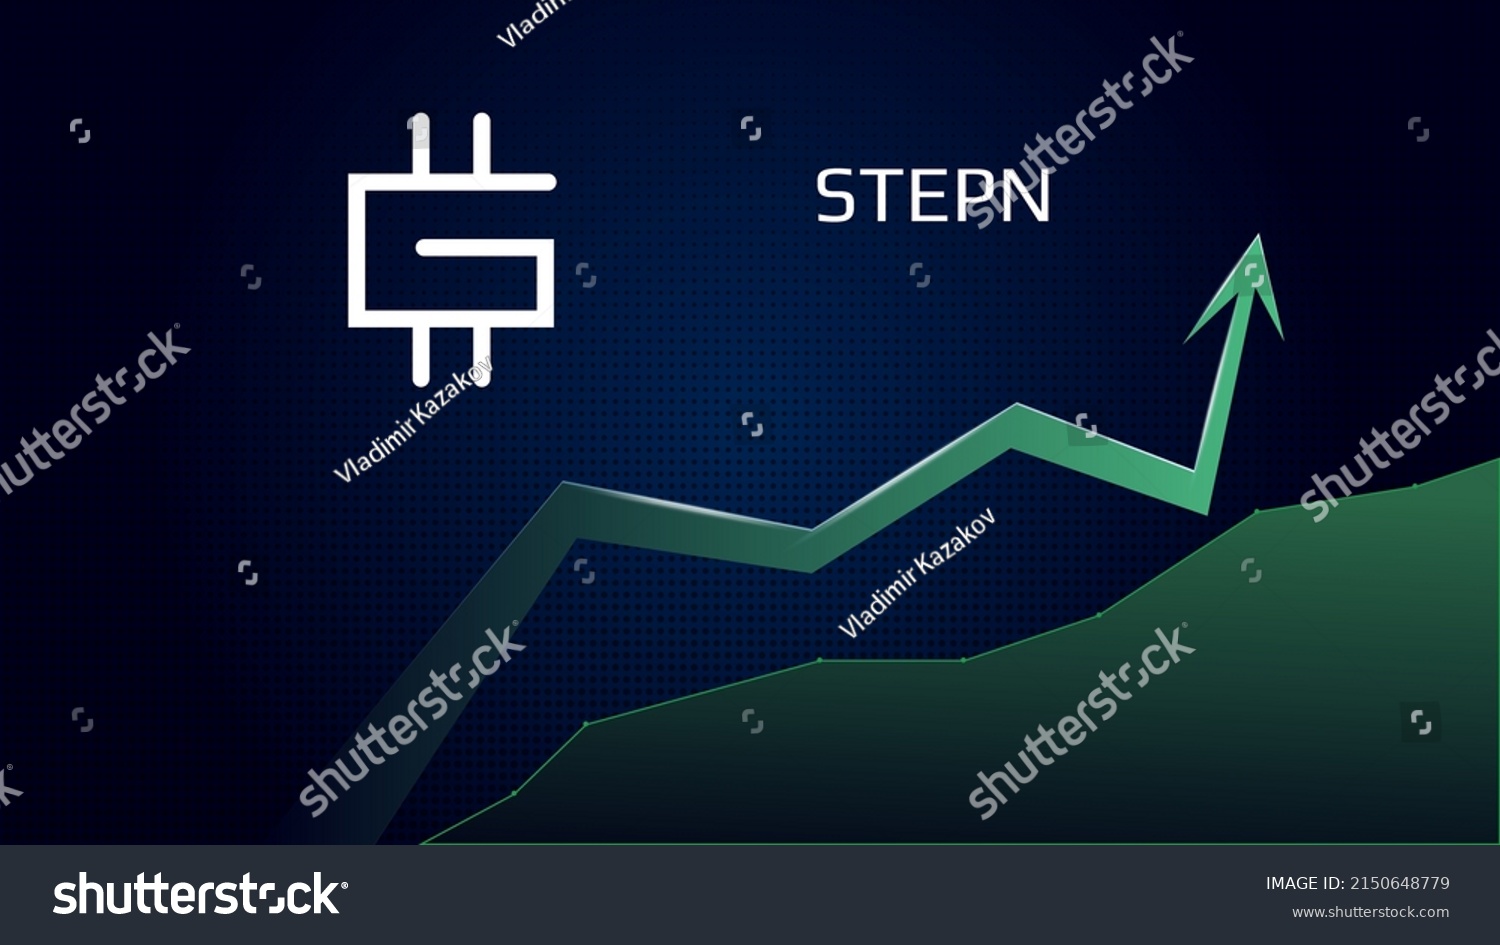 SVG of Stepn coin GMT in uptrend and price is rising. Crypto coin symbol and green up arrow. Flies to the moon. Vector illustration. svg